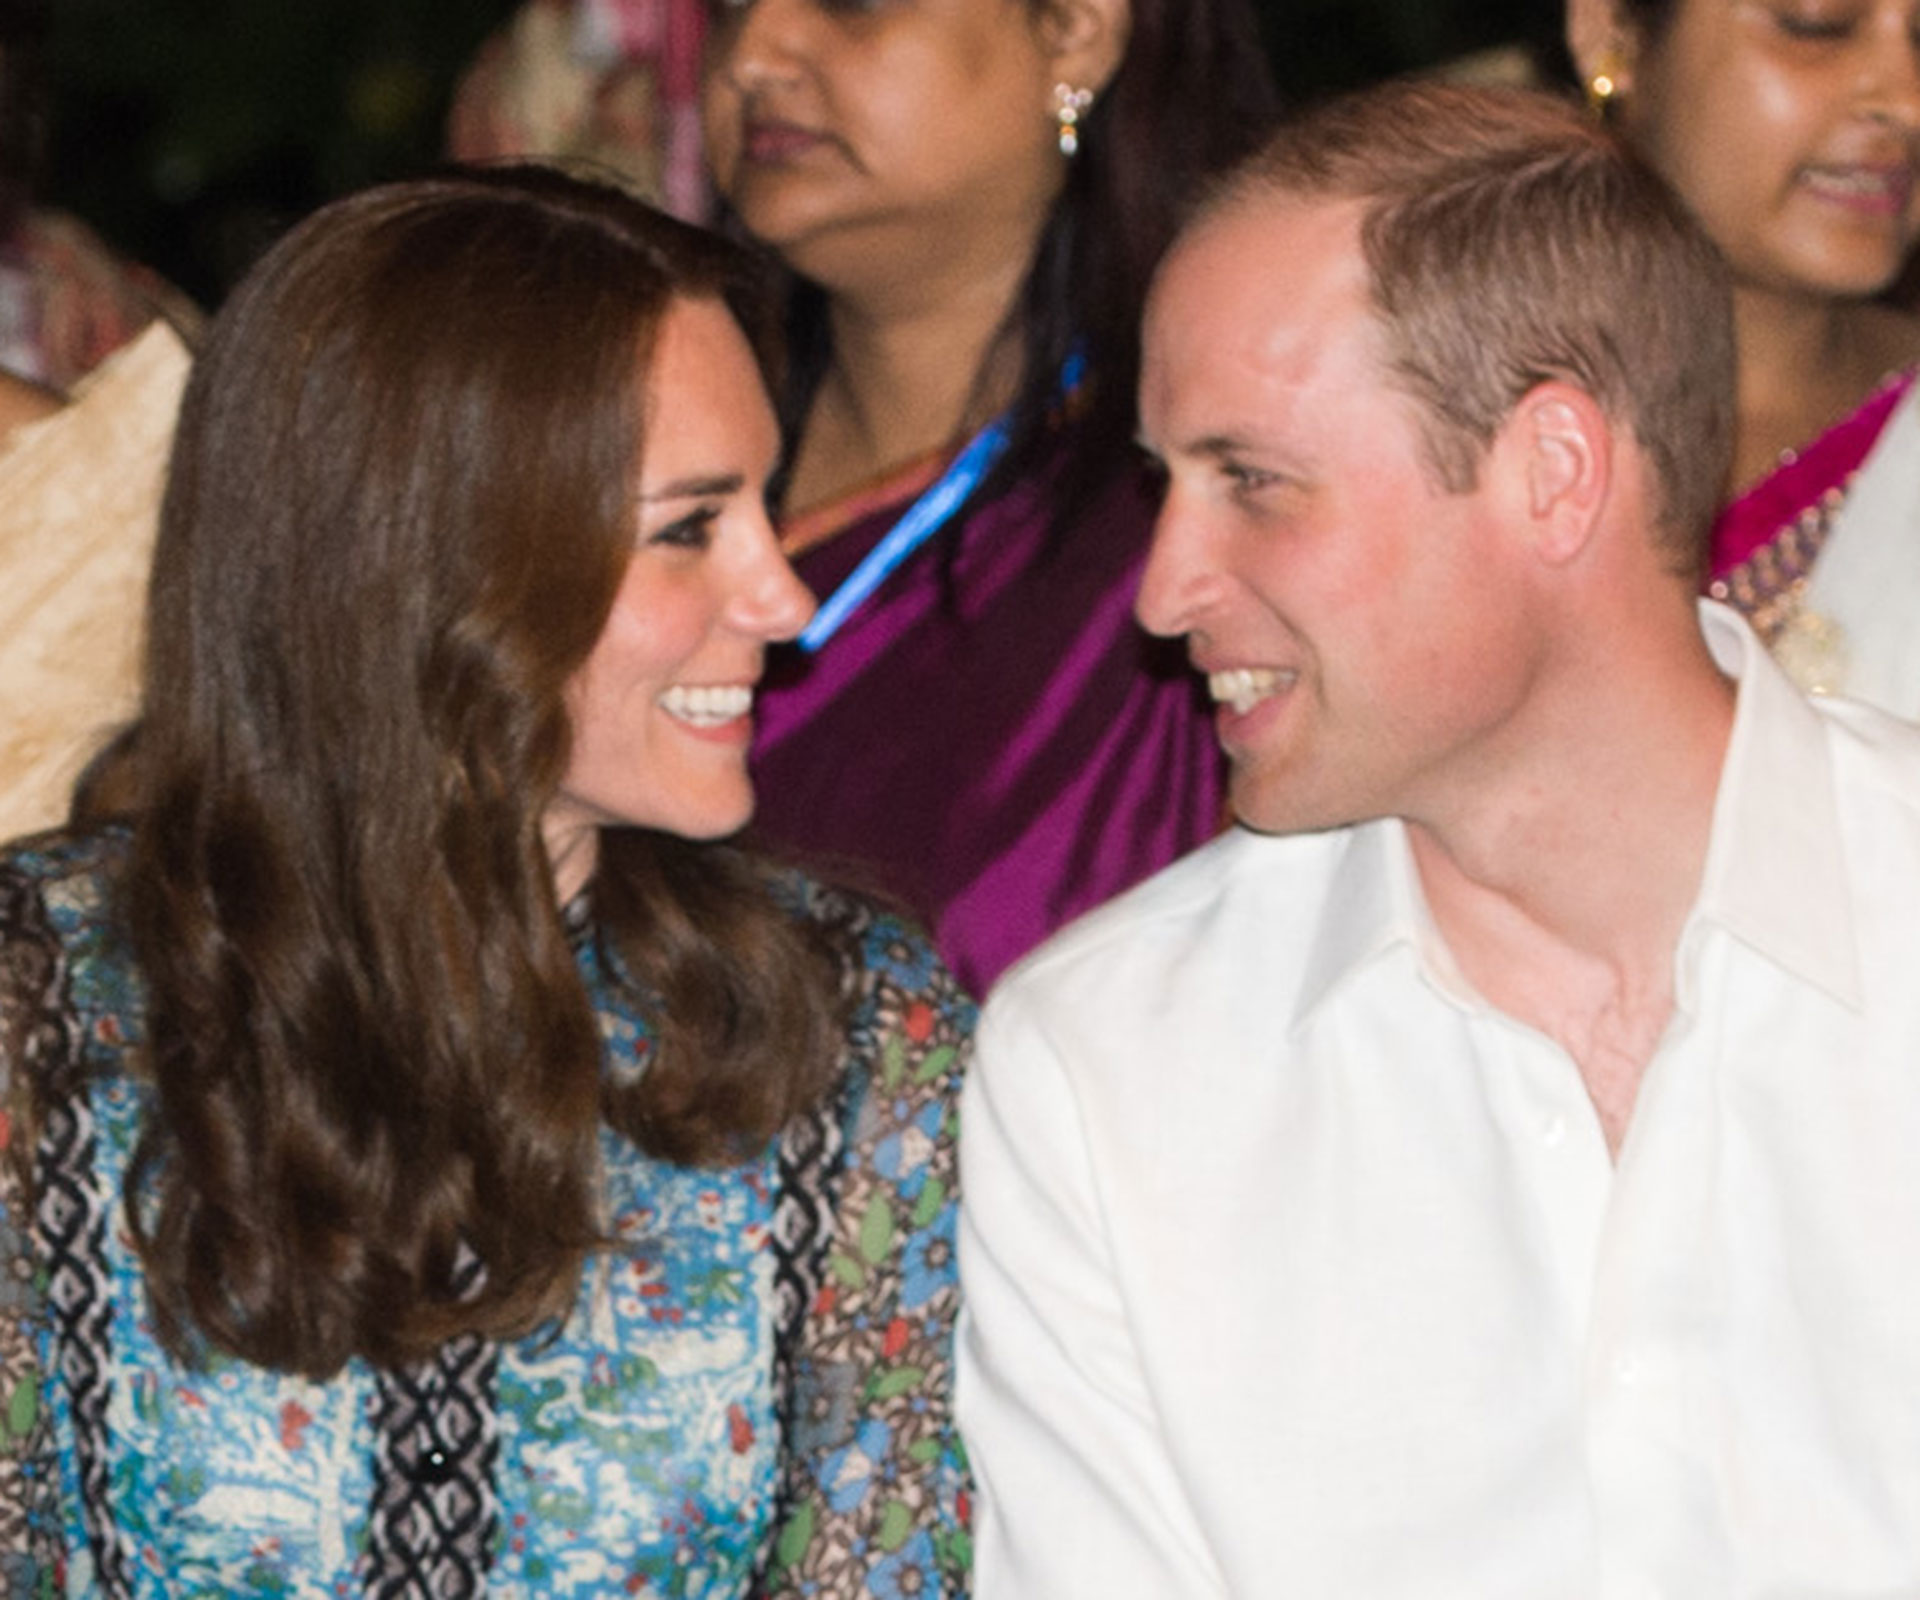 Romance in the air for William and Kate